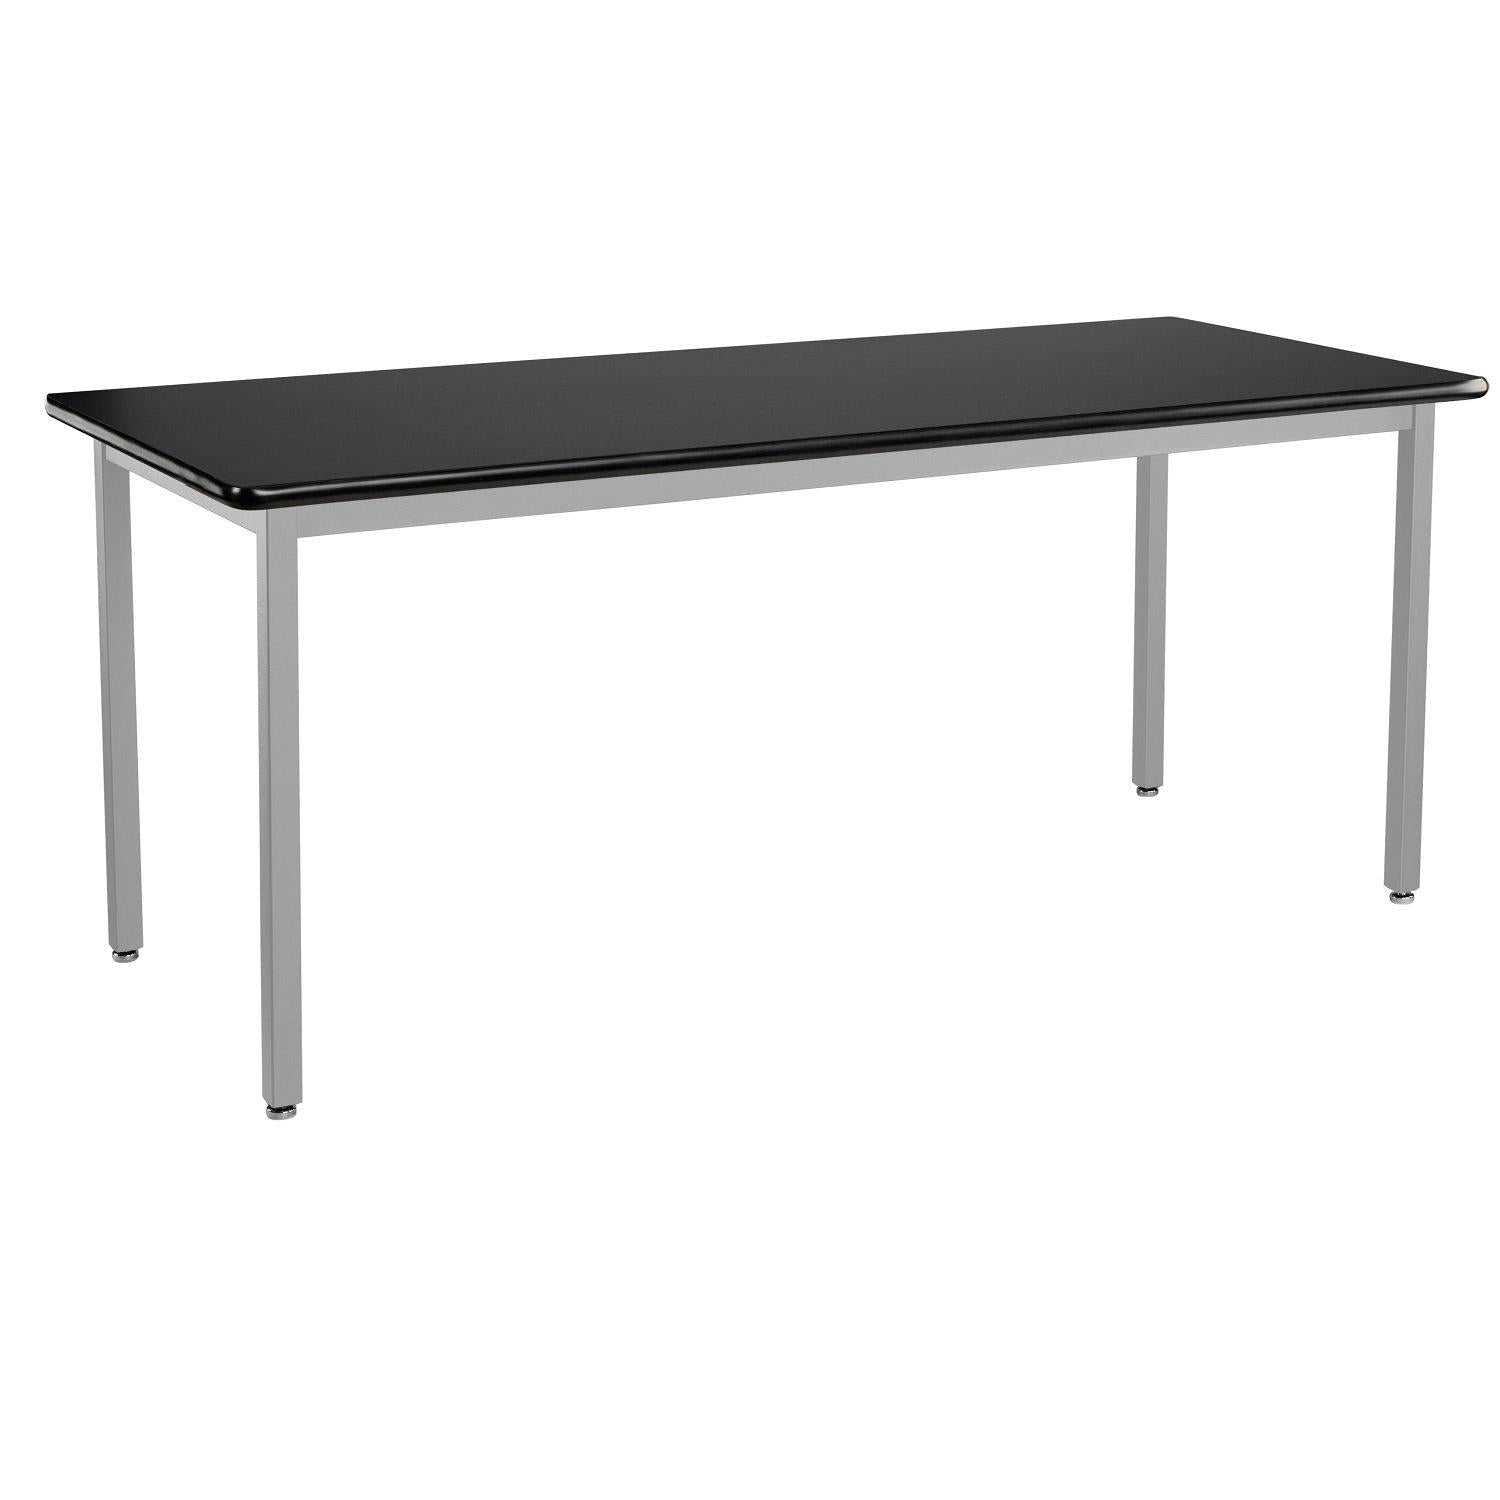 Heavy-Duty Fixed Height Utility Table, Soft Grey Frame, 24" x 72", High-Pressure Laminate Top with T-Mold Edge